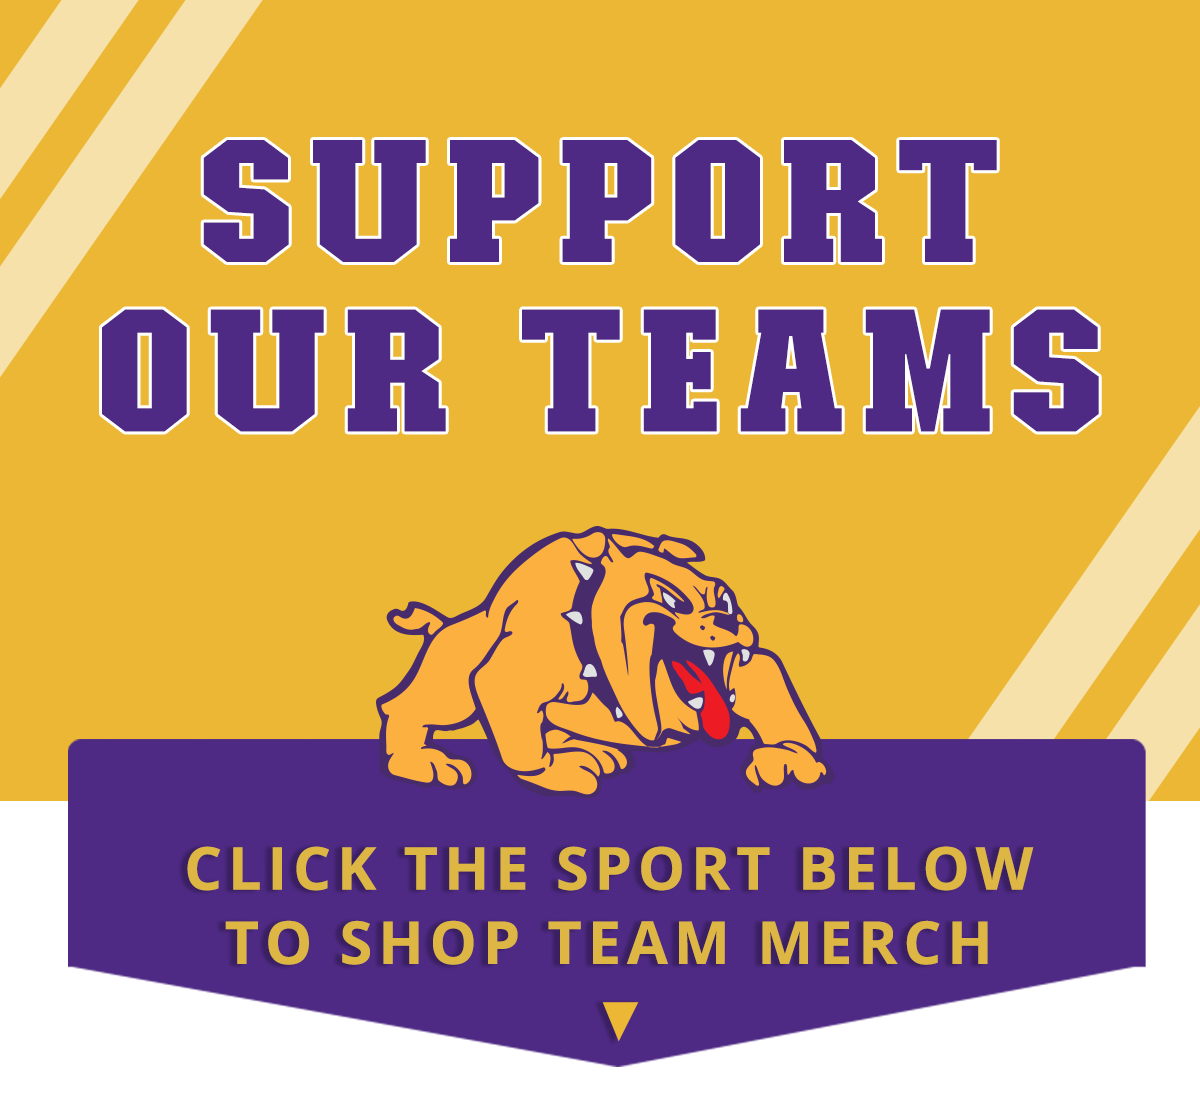 Support our teams. Click the sport below to shop team merch 